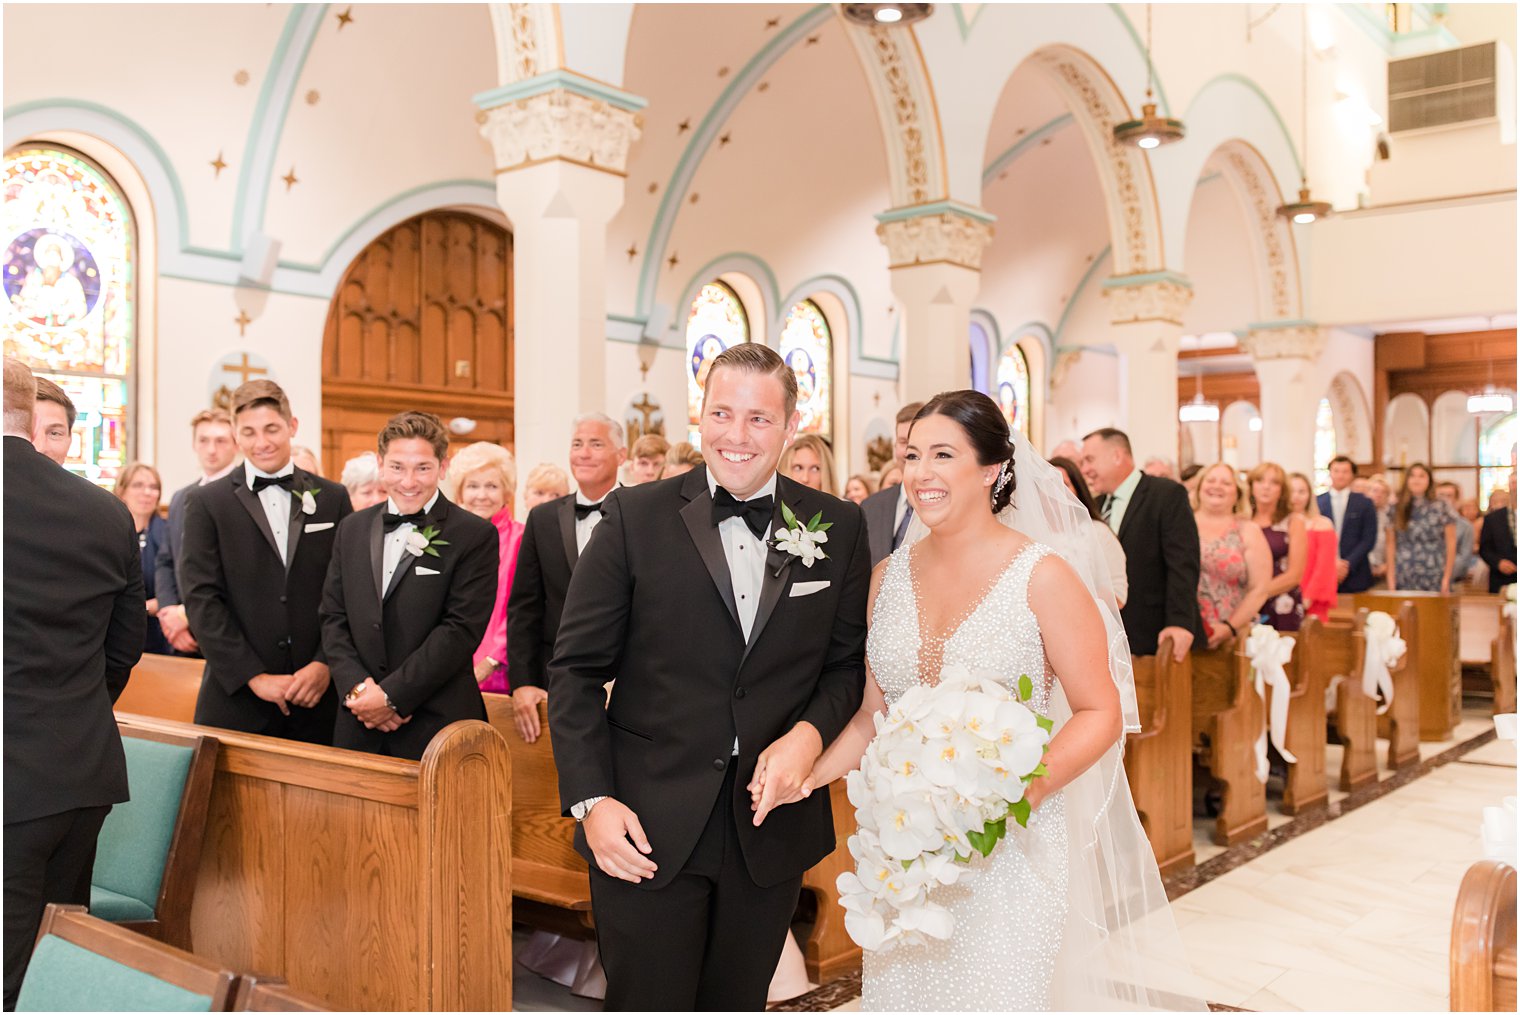 groom and bride meet during traditional wedding ceremony at St. James church